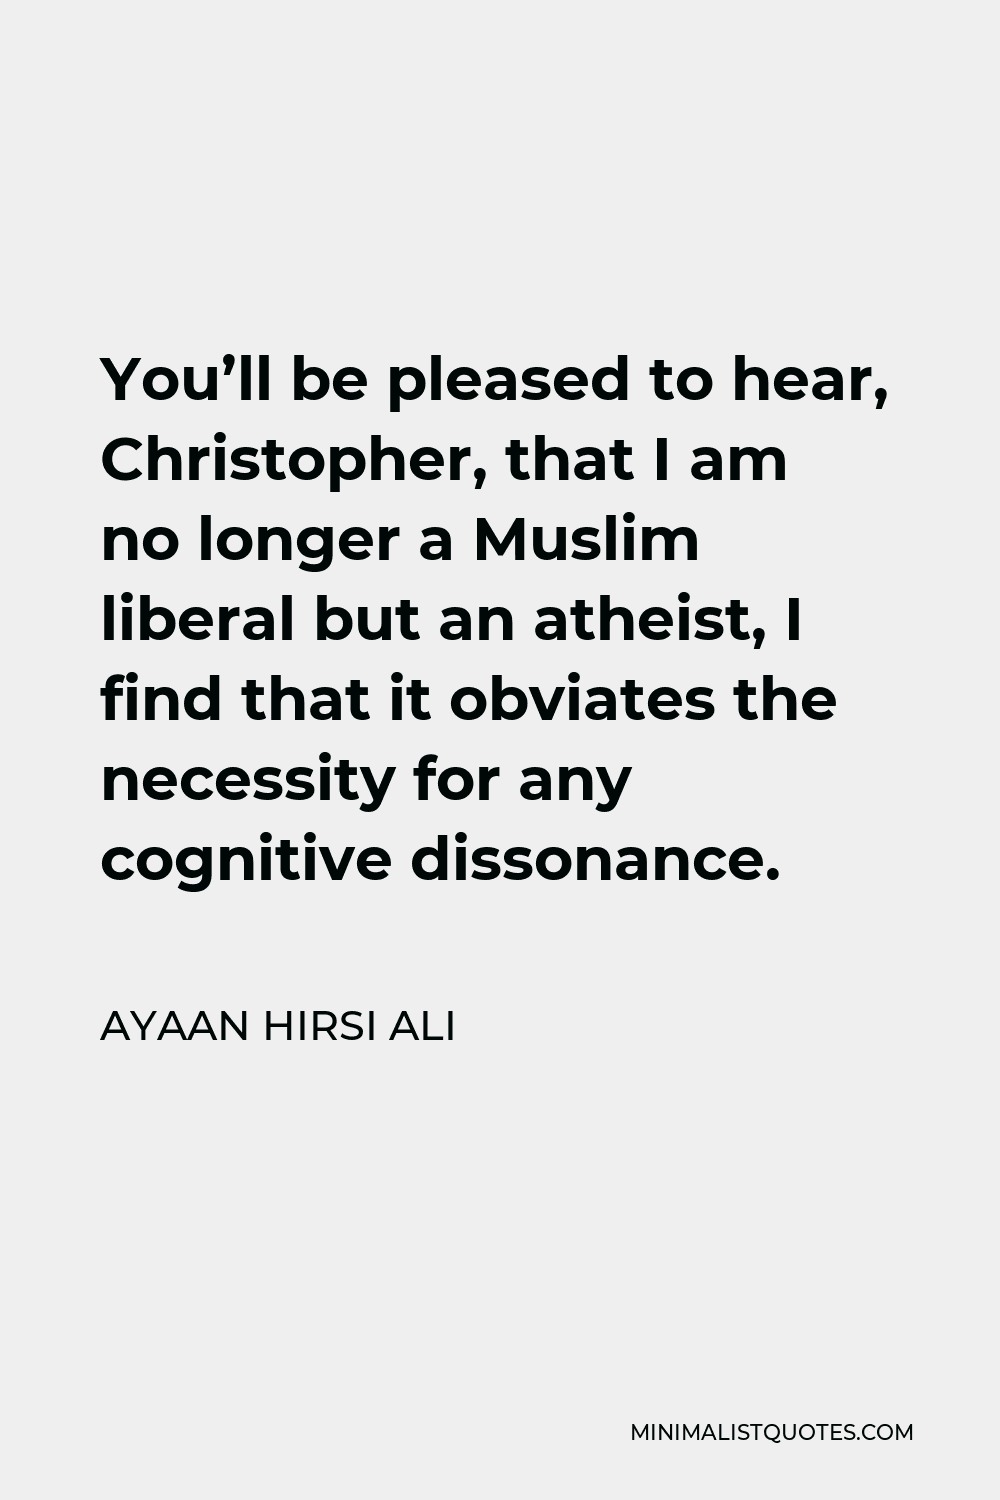 Ayaan Hirsi Ali Quote - You’ll be pleased to hear, Christopher, that I am no longer a Muslim liberal but an atheist, I find that it obviates the necessity for any cognitive dissonance.